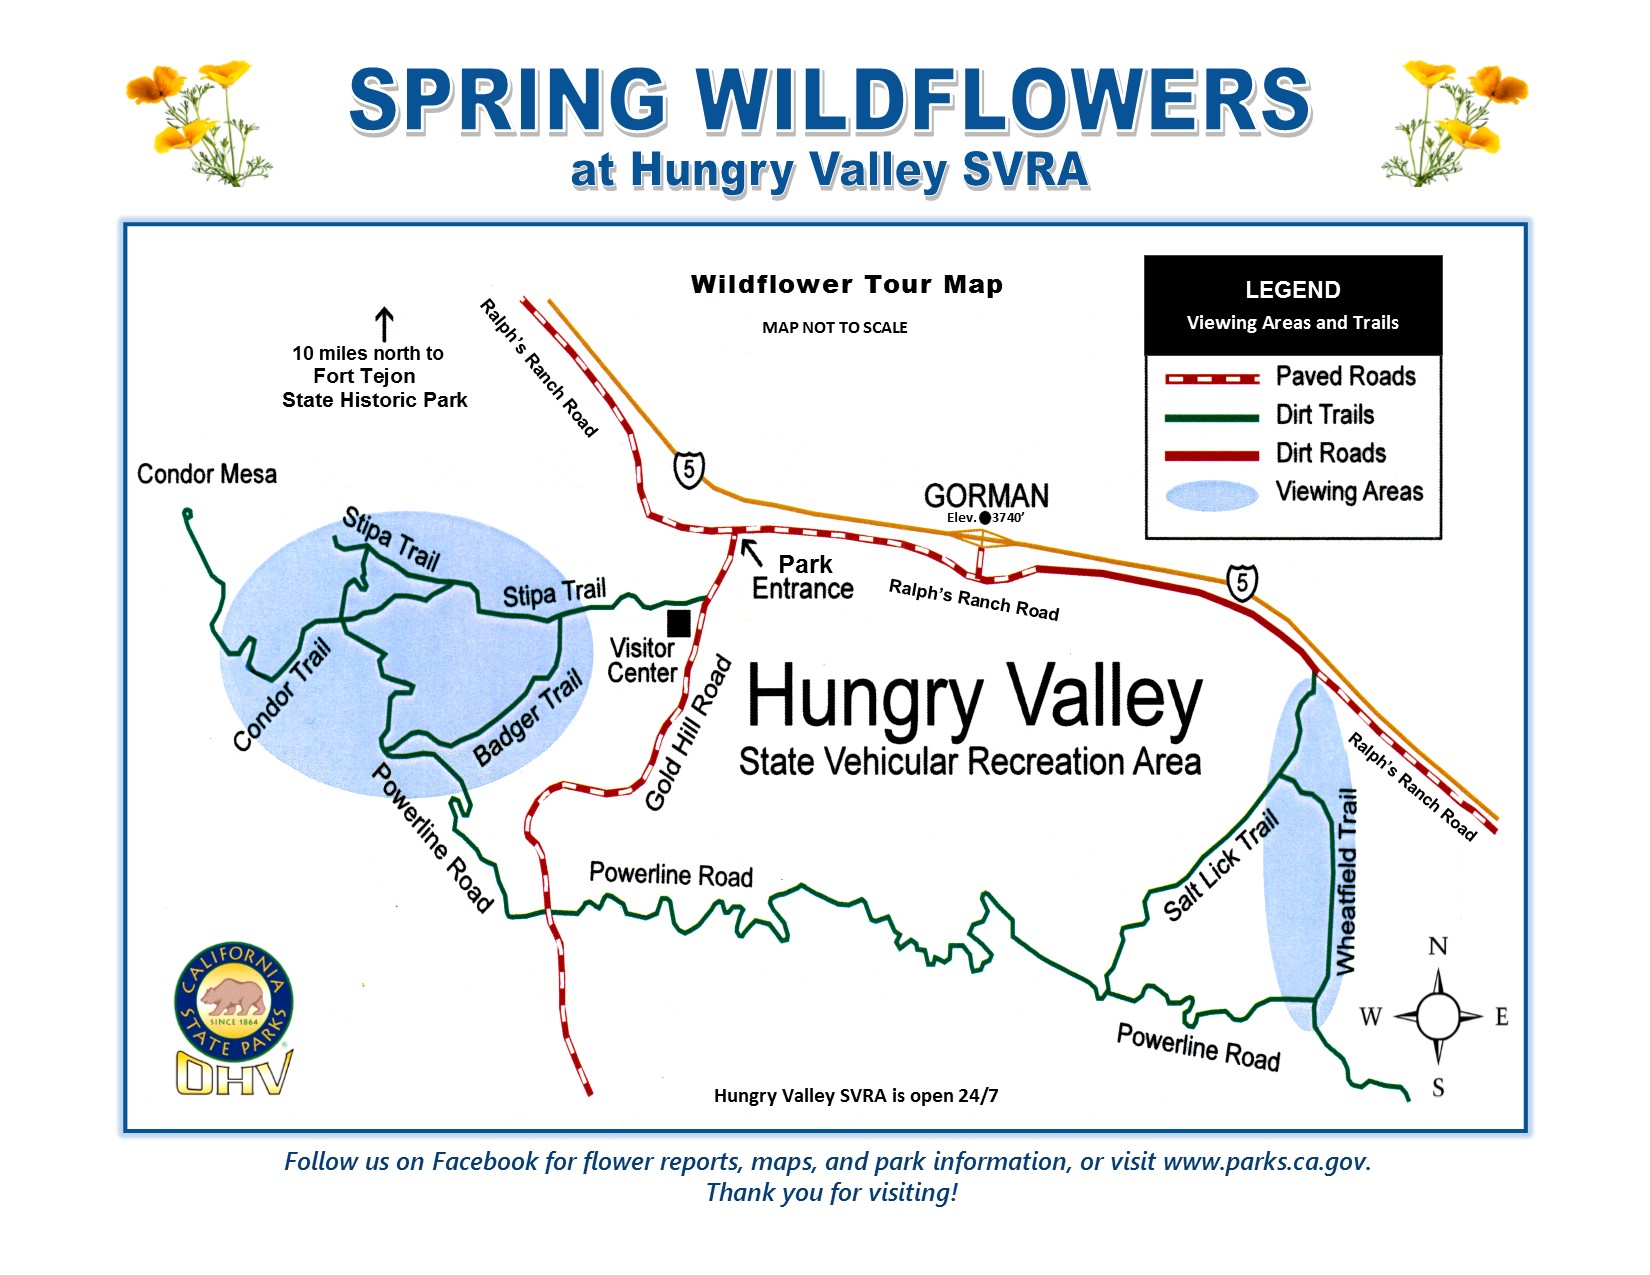 Map Titled: Spring Wildflowers at Hungry Valley. Map depicts wild flower viewing areas at Hungry Valley State Vehiculare Recreation Area. The larger viewing area depicted is located in the vicinity of Stipa trail, Condor trail, Powerline Road, and Badger trail west of Gold Hill Road. A smaller viewing area is located along Wheatfield Trail at the east end of the park. The map depicts Paved and dirt roads, and dirt trails.